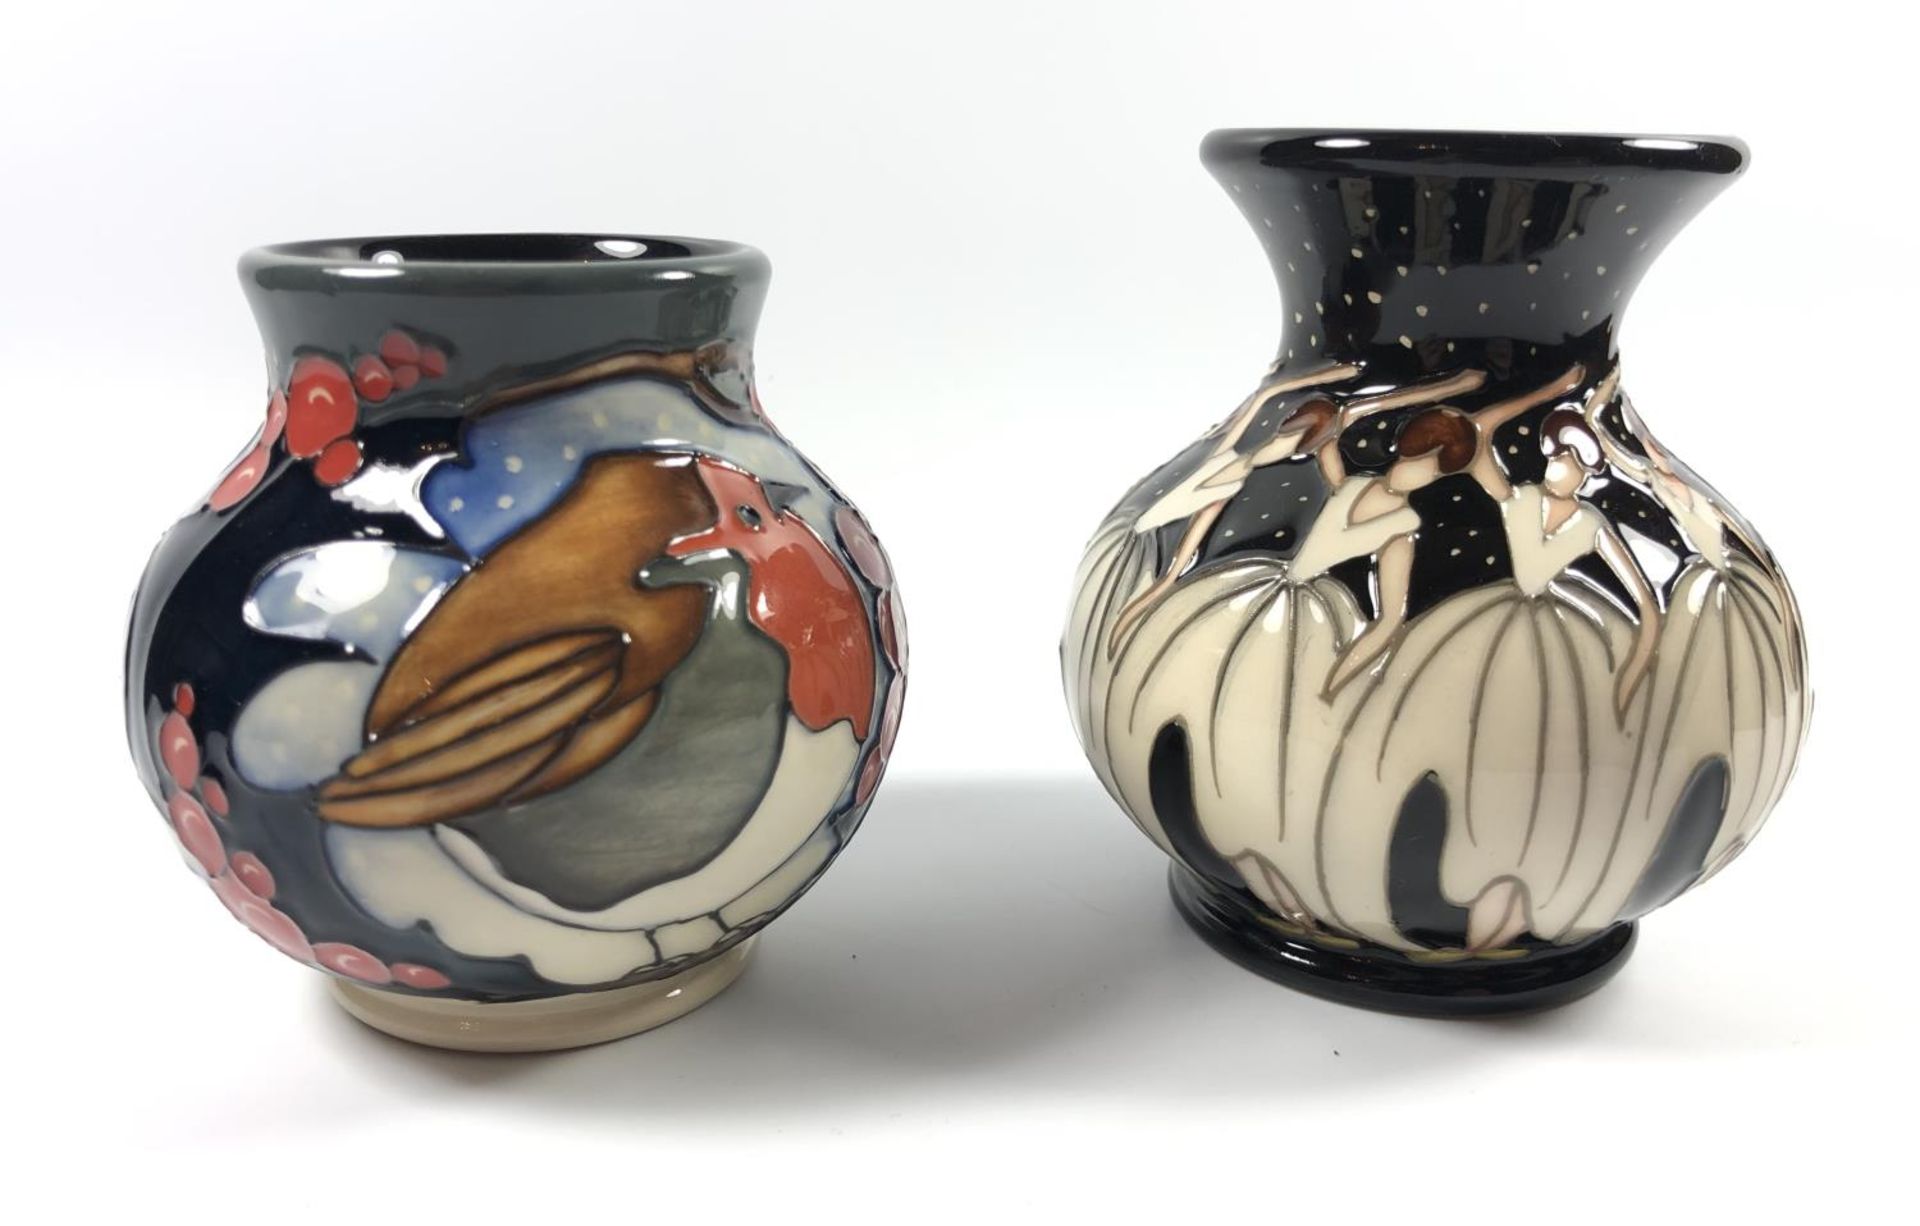 TWO MOORCROFT CHRISTMAS PATTERN VASES - A BRAVE SIR ROBIN AND NINE LADIES DANCING VASE, BOTH WITH